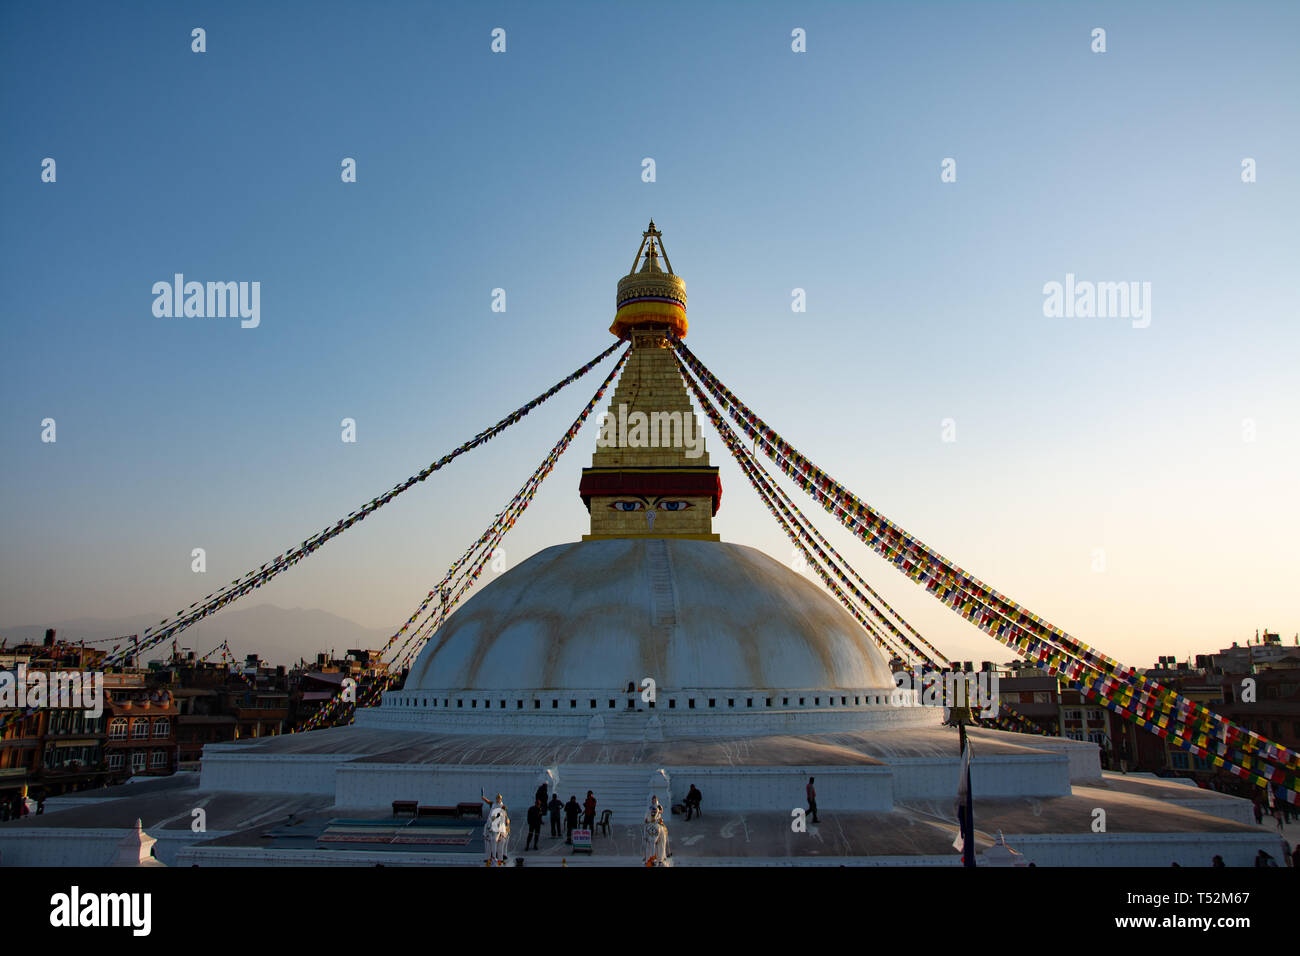 Kathmandu, Nepal - December 03, 2016: A view of Bouddha stupa in Kathmandu this evening. It is one of the largest stupas in the world. Stock Photo